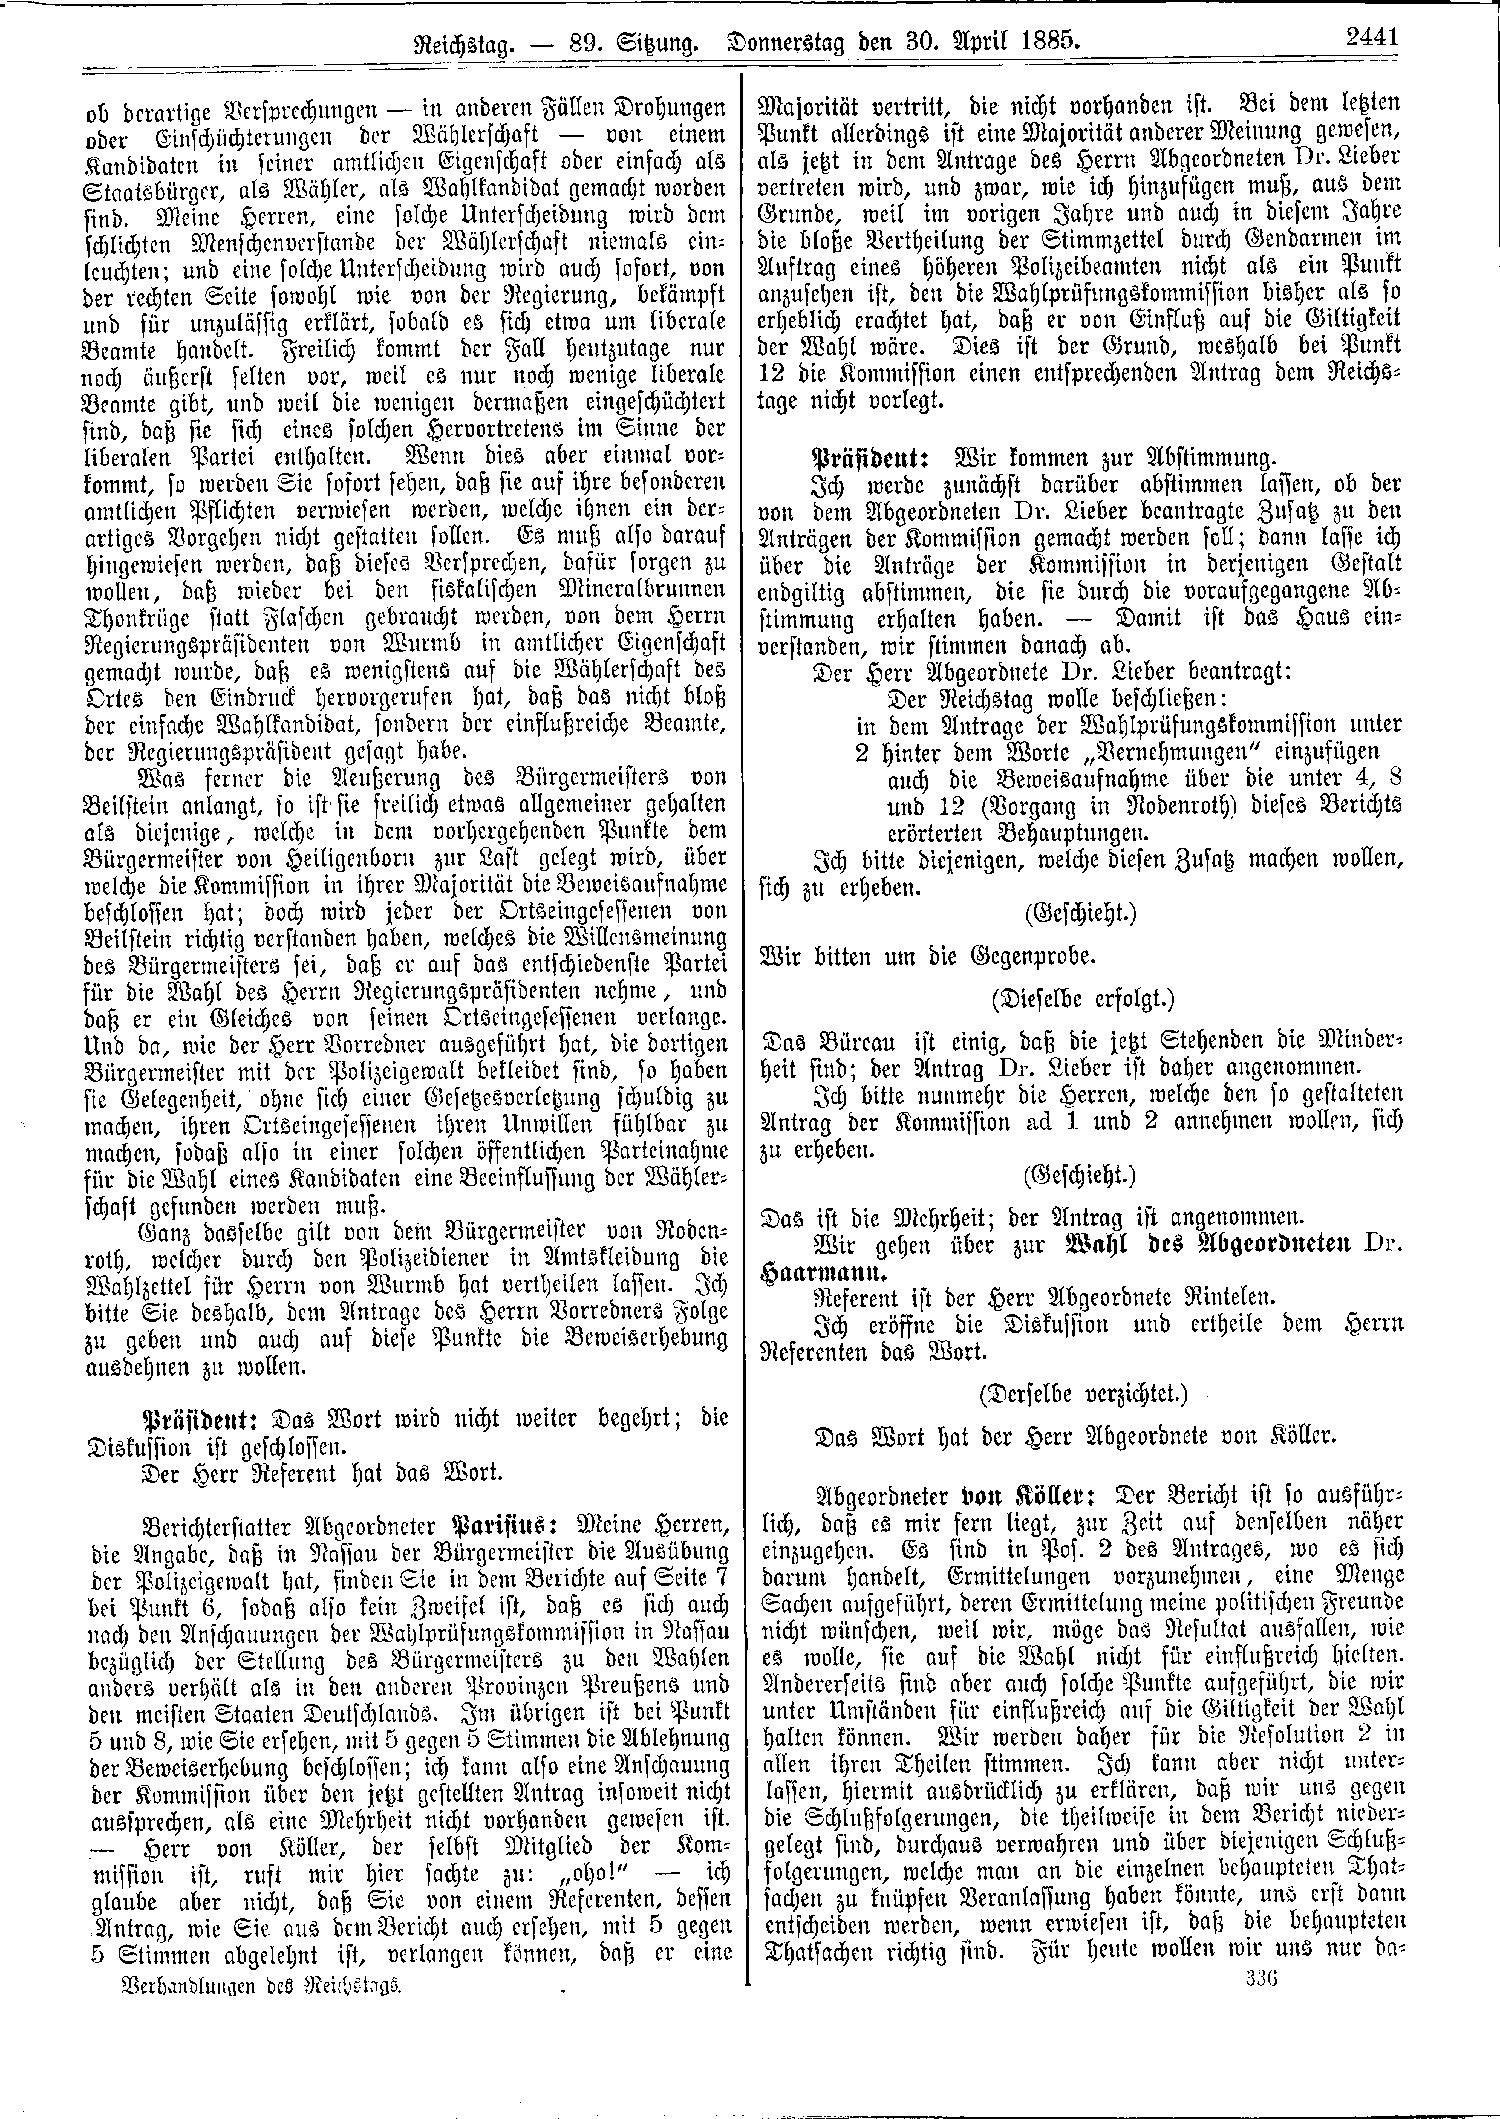 Scan of page 2441